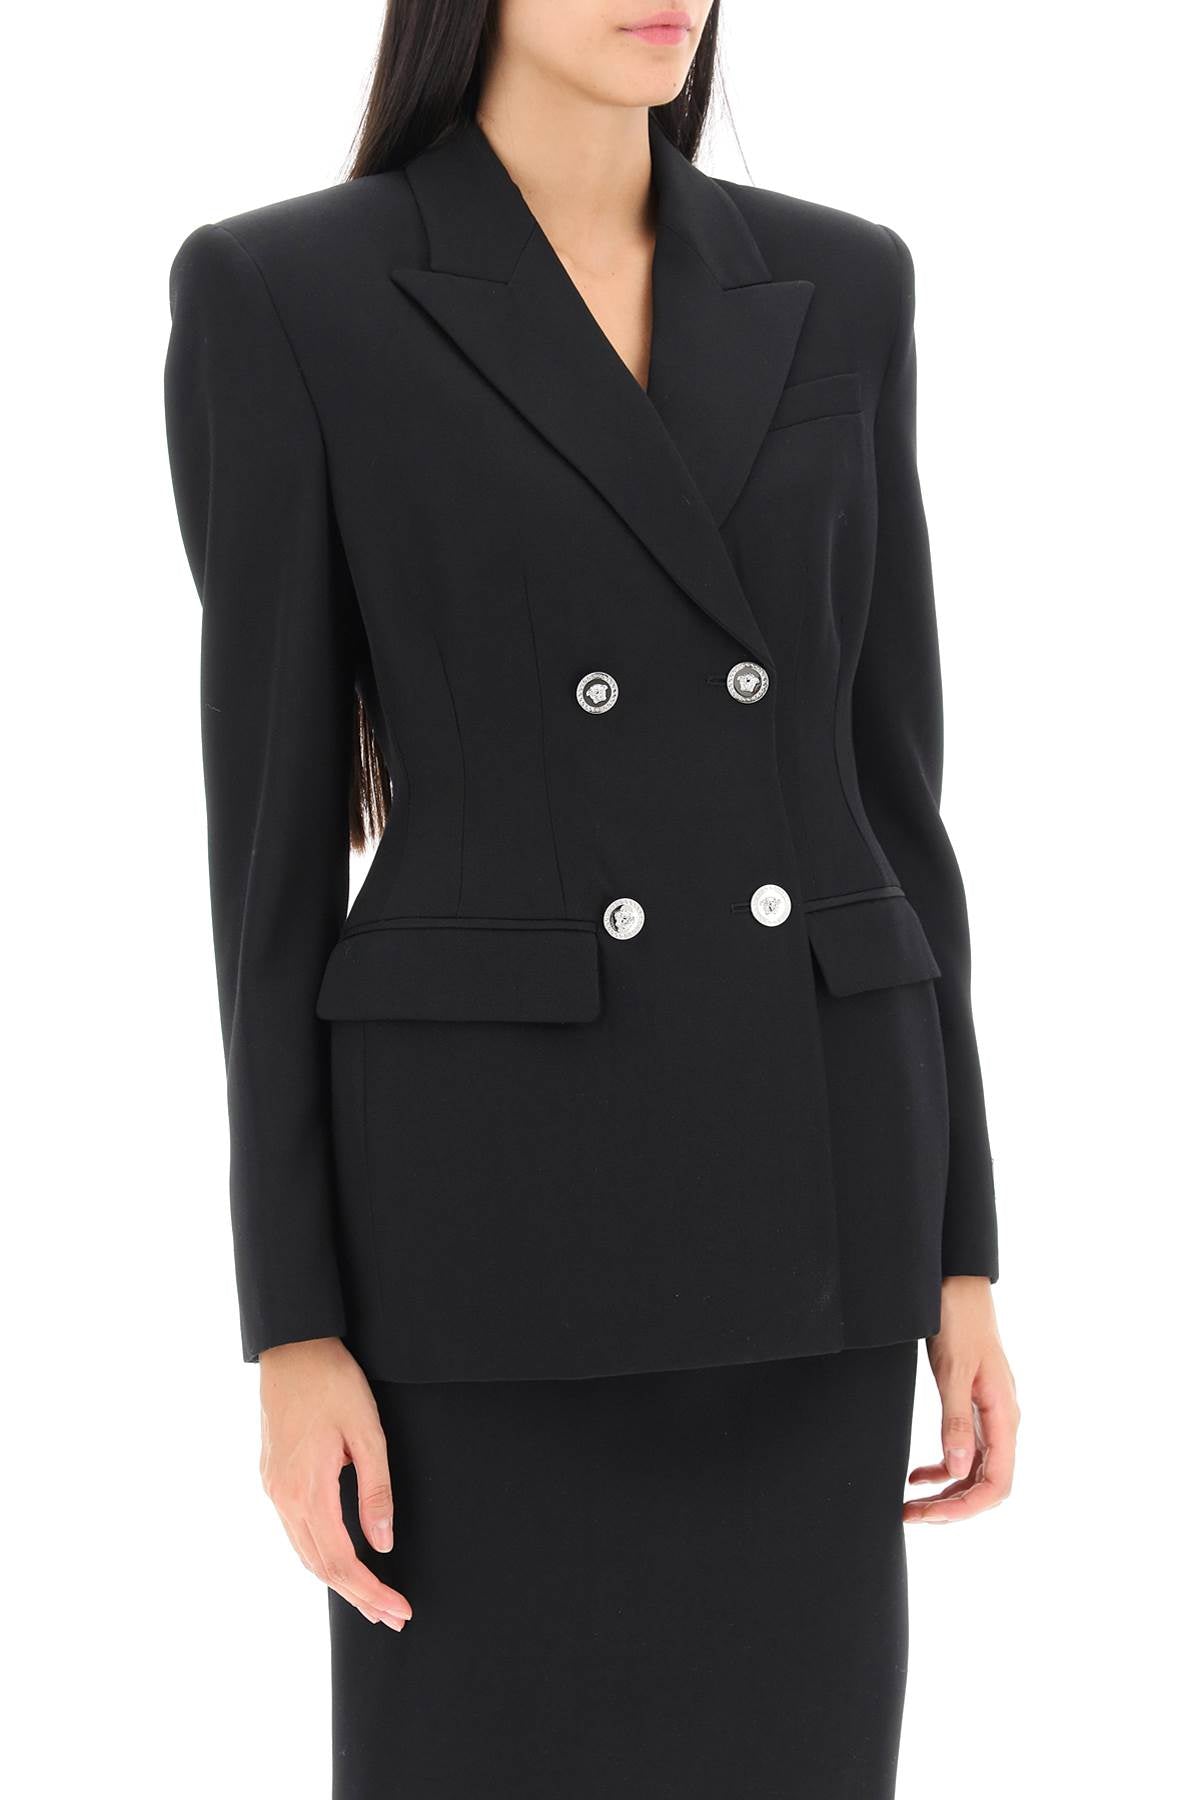 Versace hourglass double-breasted blazer-1